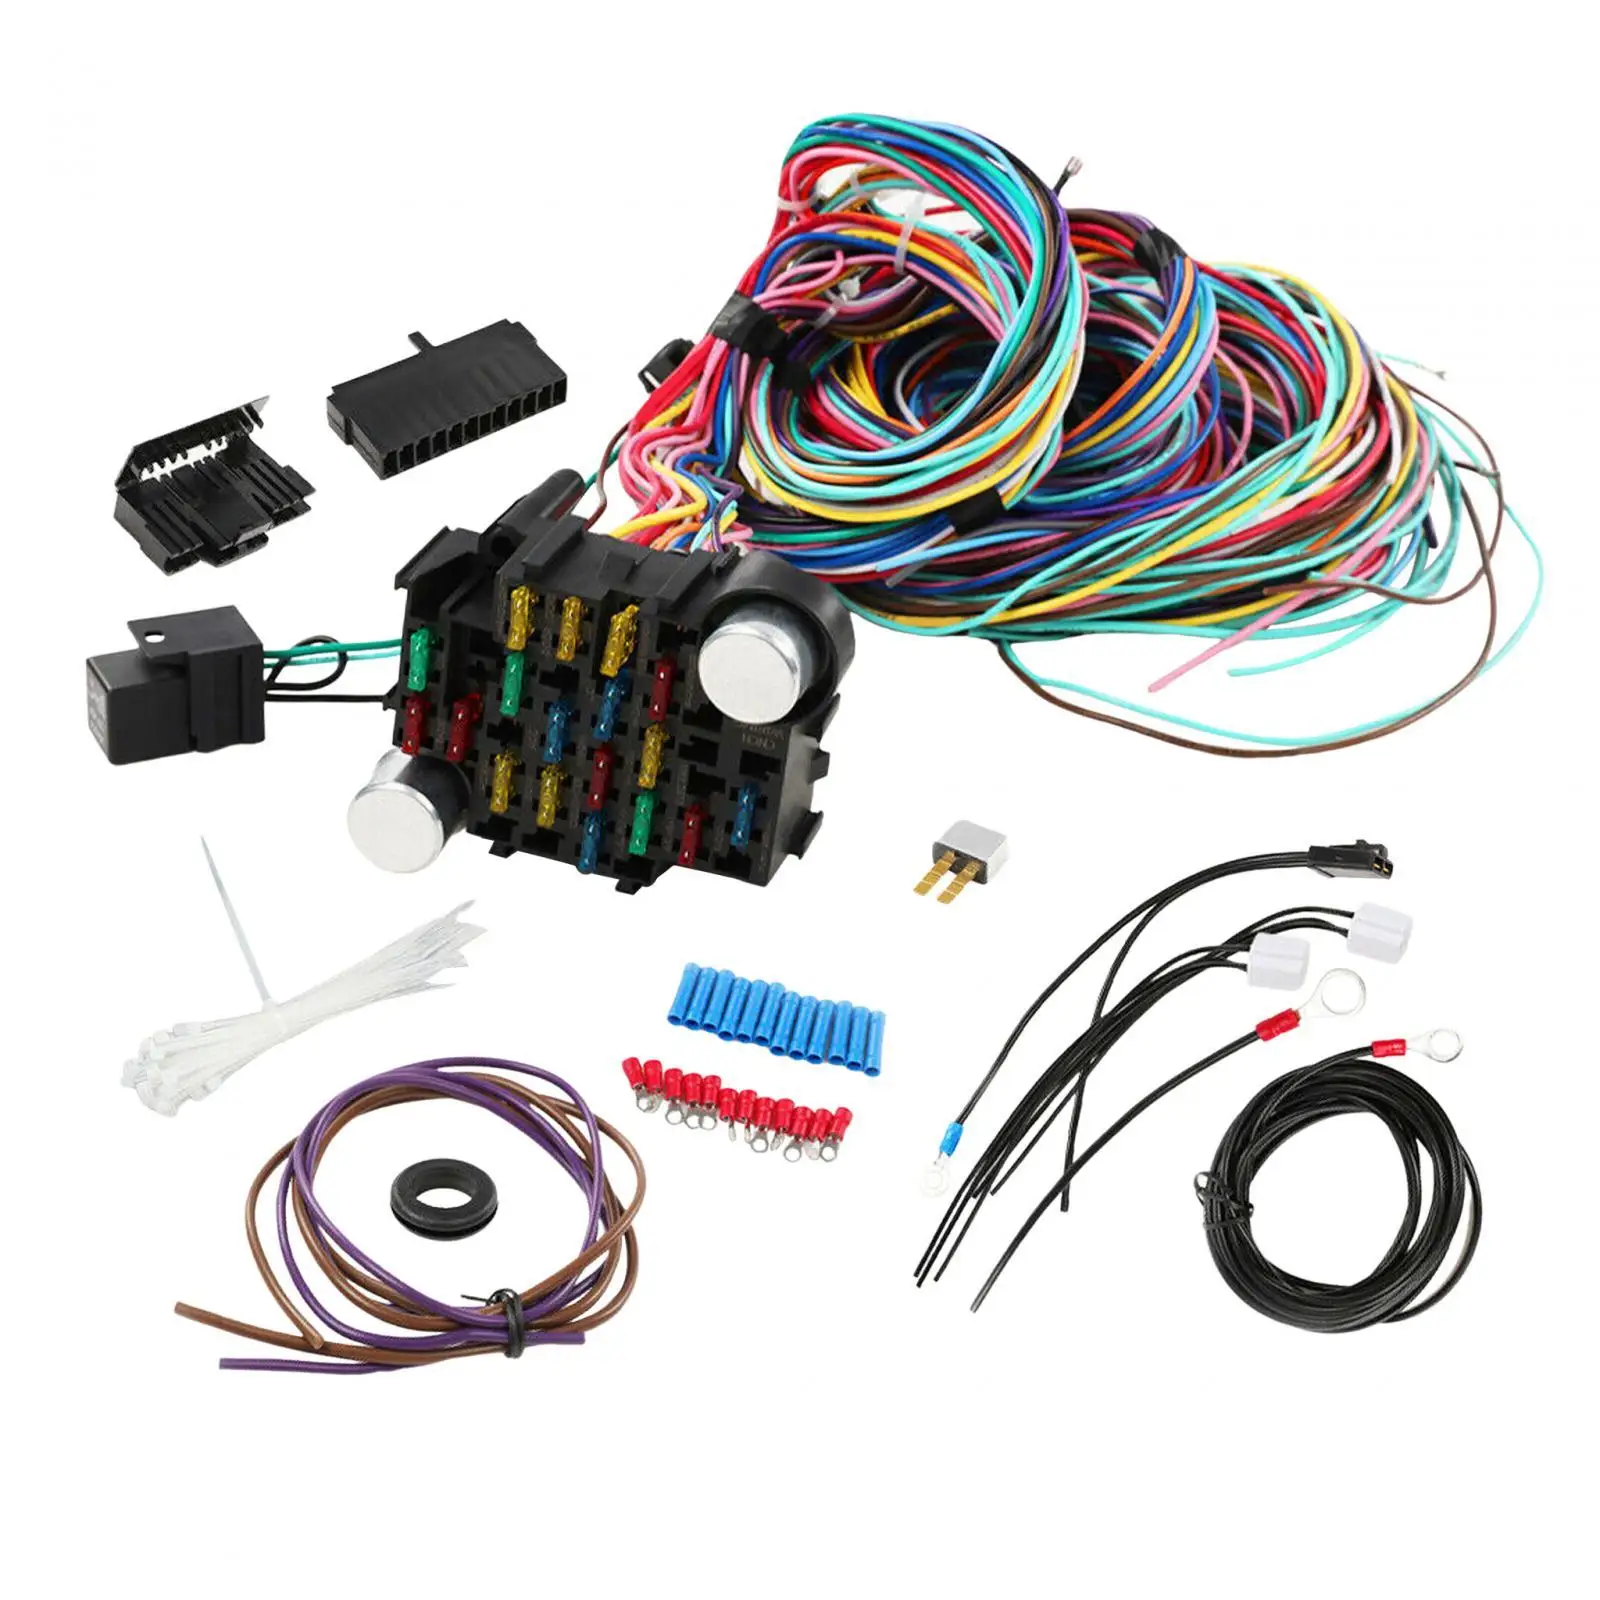 Universal Wiring Harness Kit Replacement 12V Stable Performance Extra Long Wires Attachment Accessories for Vehicle